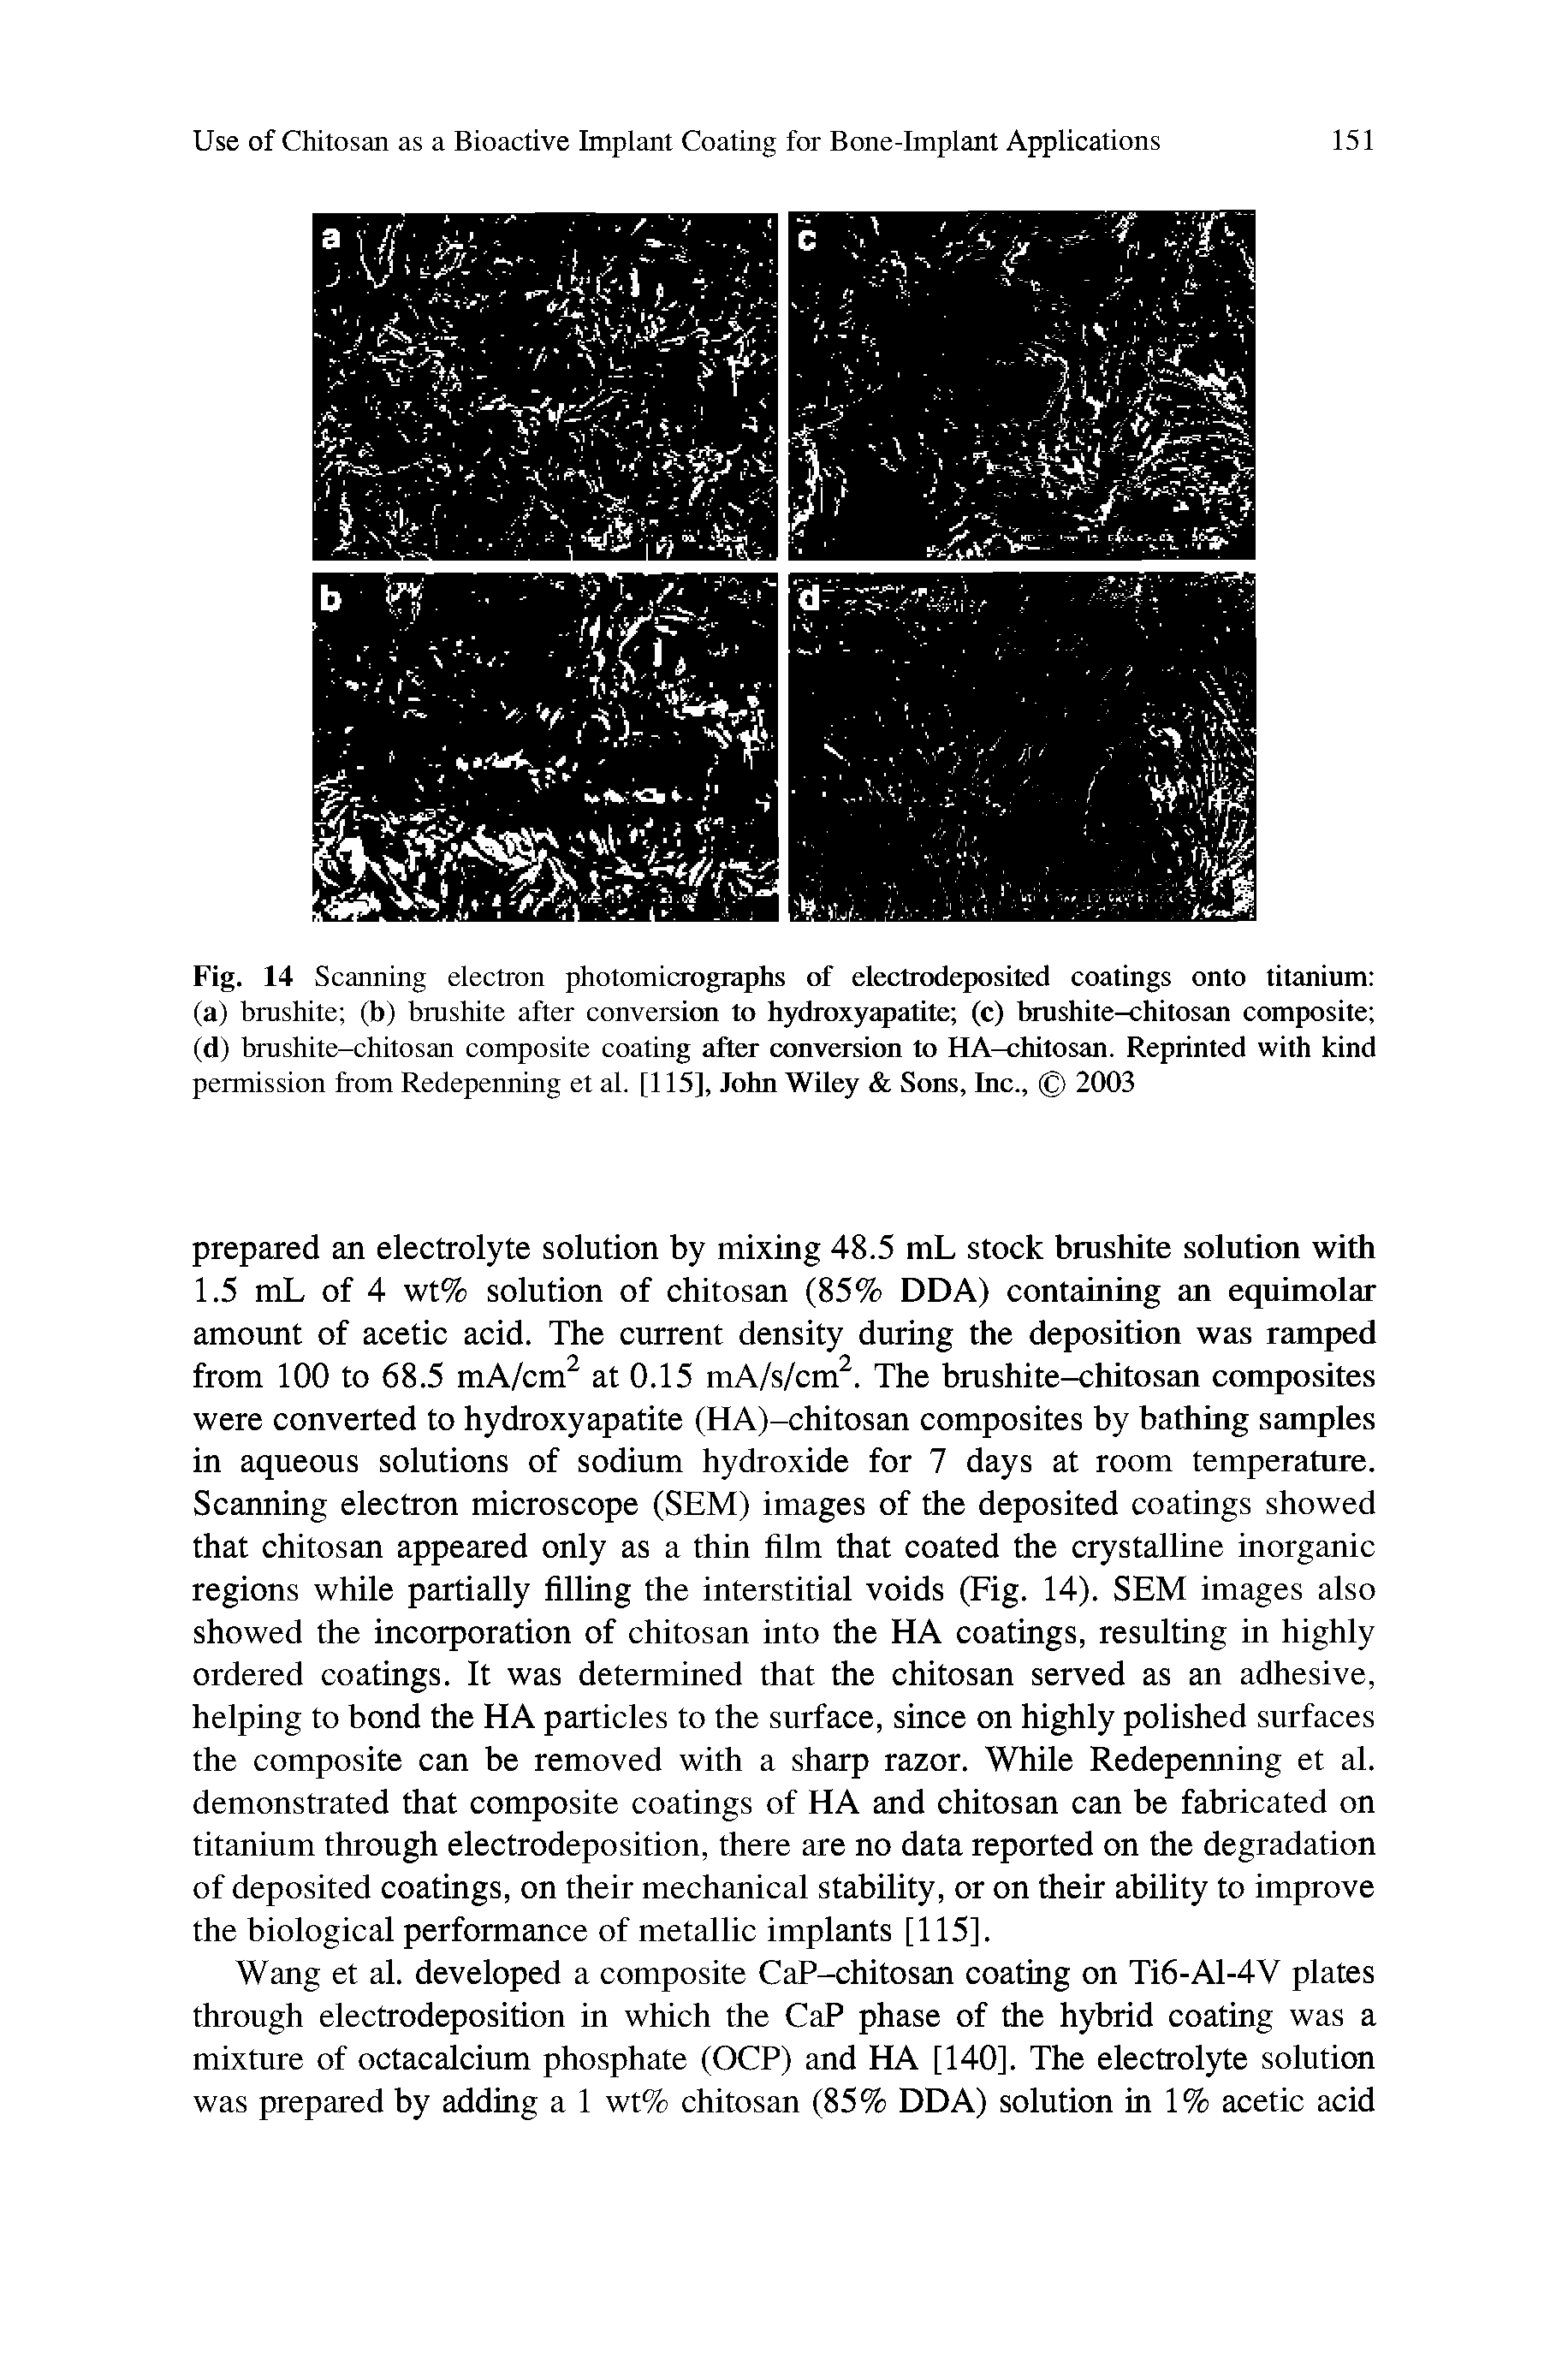 Fig. 14 Scanning electron photomicrographs of electrodeposited coatings onto titanium (a) brushite (b) bmshite after conversion to hydroxyapatite (c) brushite-chitosan composite (d) brushite-chitosan composite coating after conversion to HA-chitosan. Reprinted with kind permission from Redepenning et al. [115], John Wiley Sons, Inc., 2003...